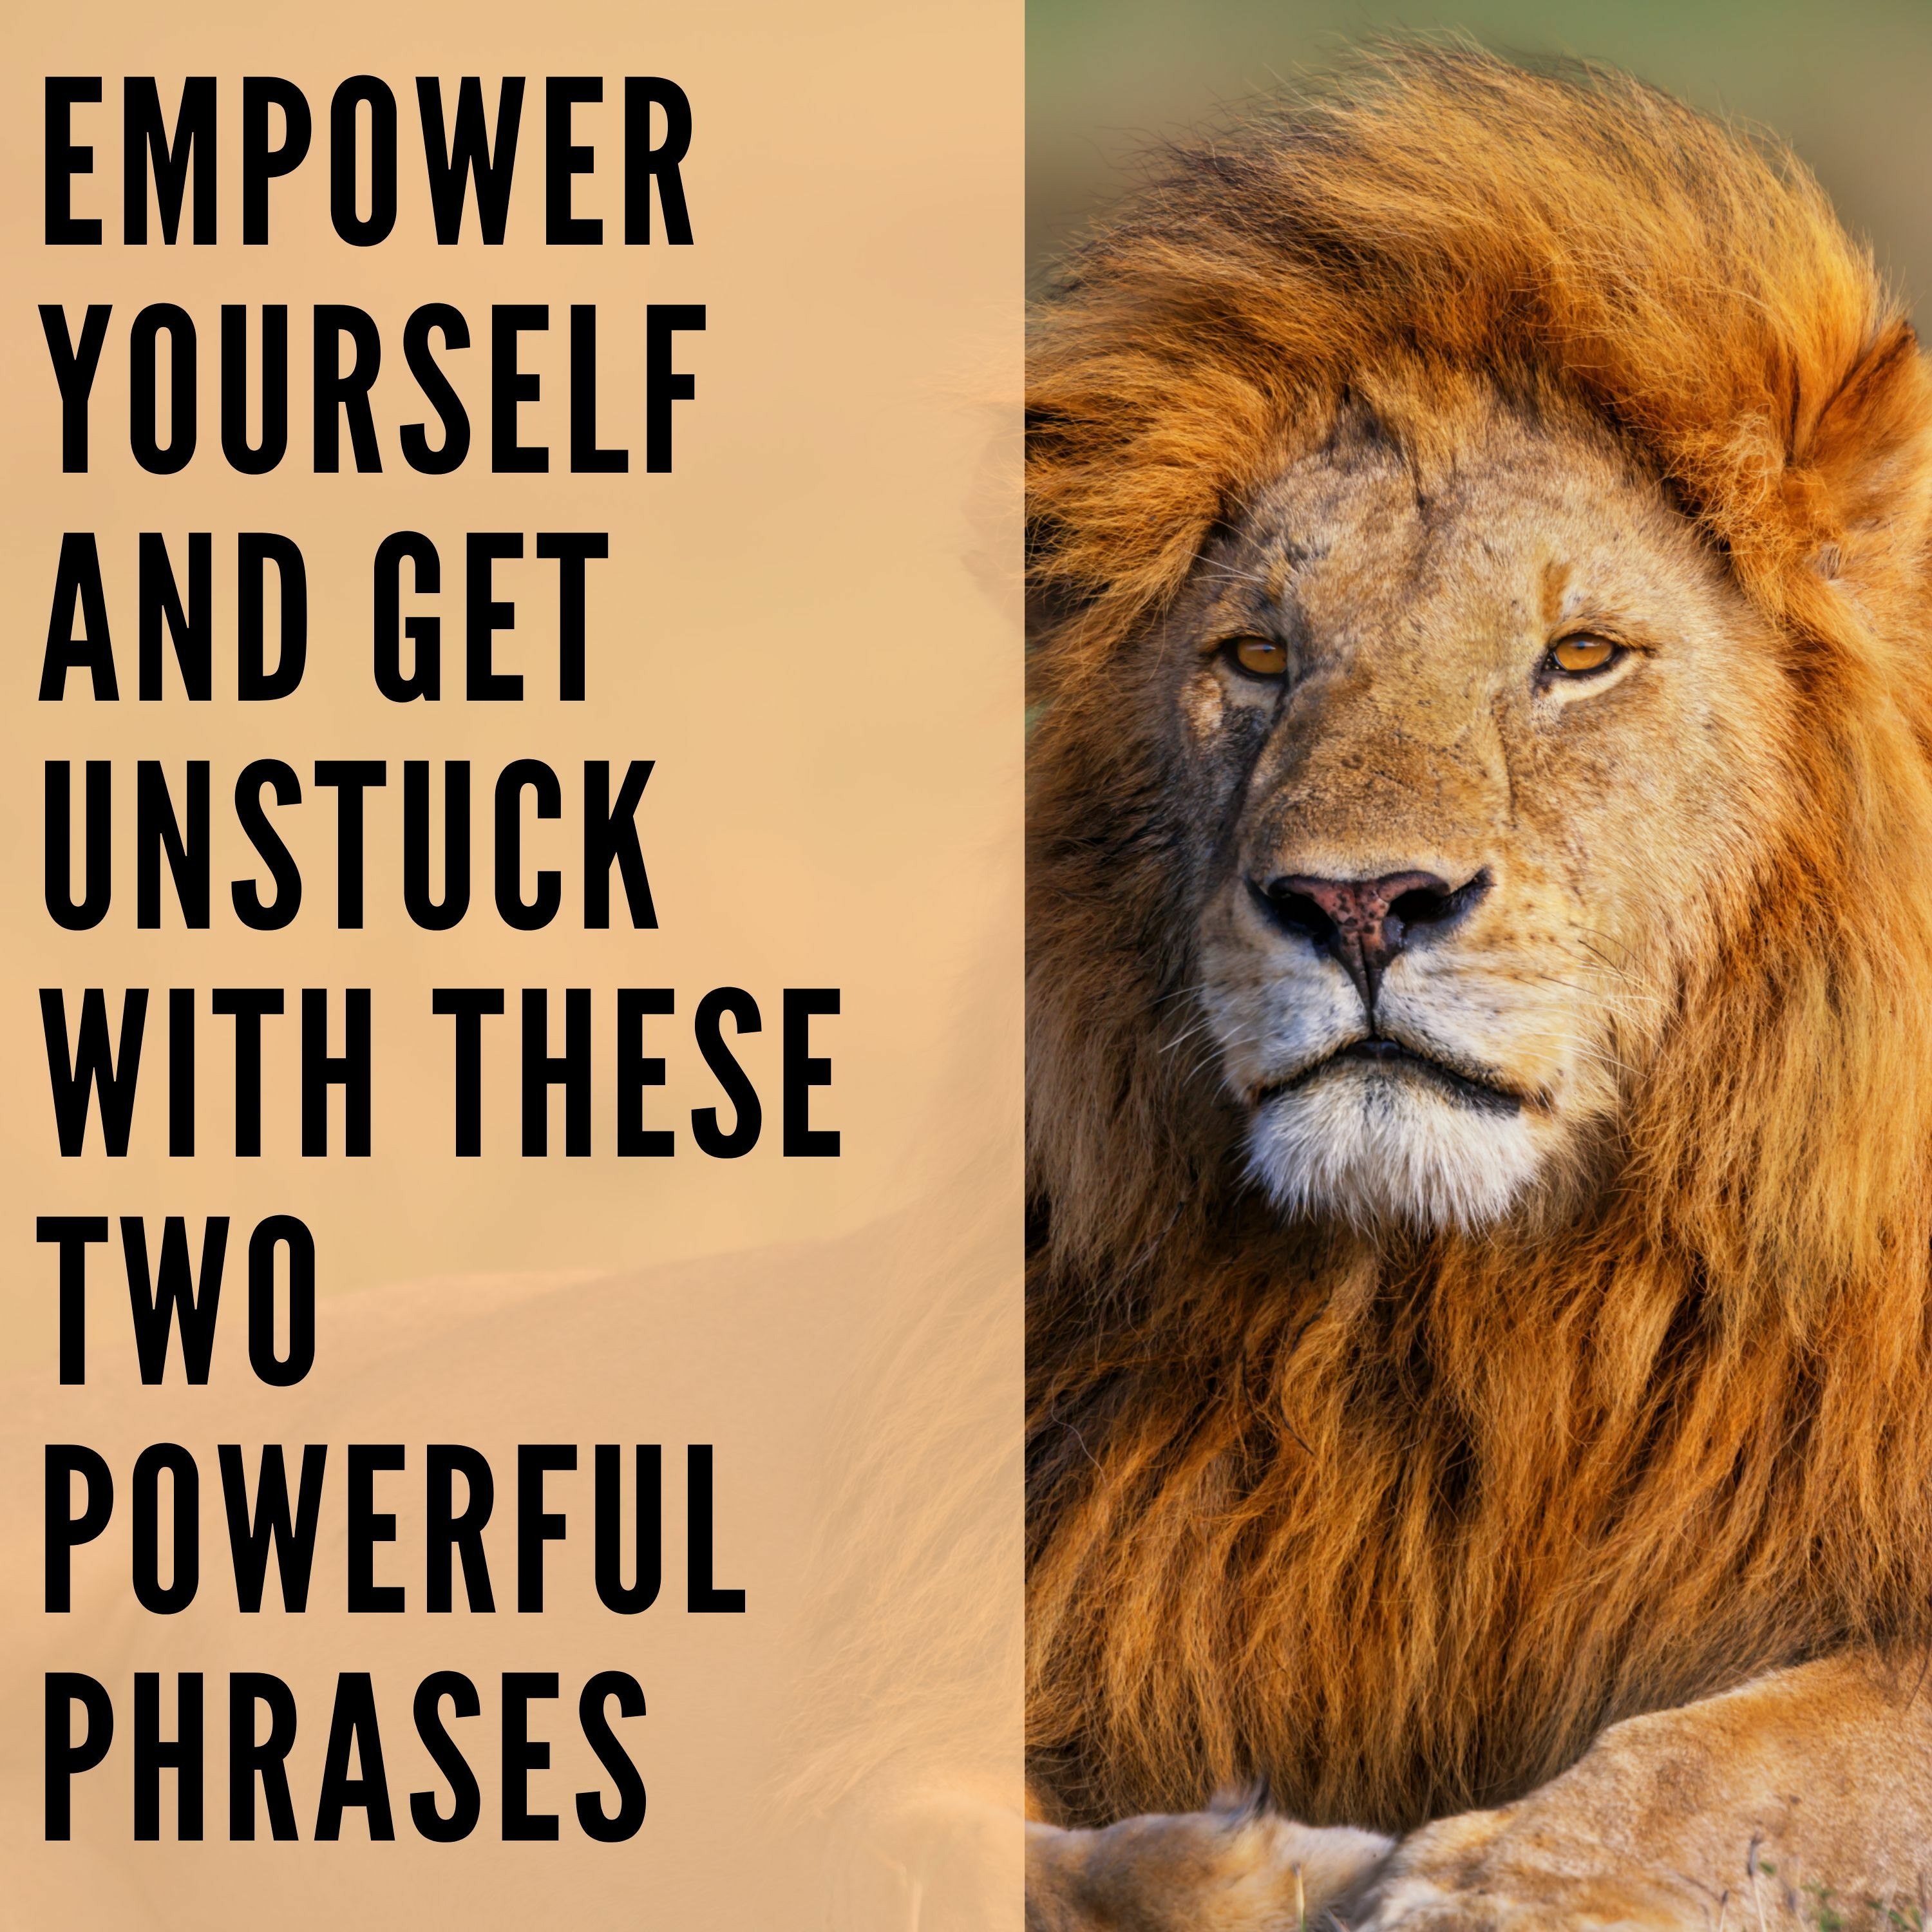 112 // Empower Yourself and Get Unstuck With These Two Powerful Phrases